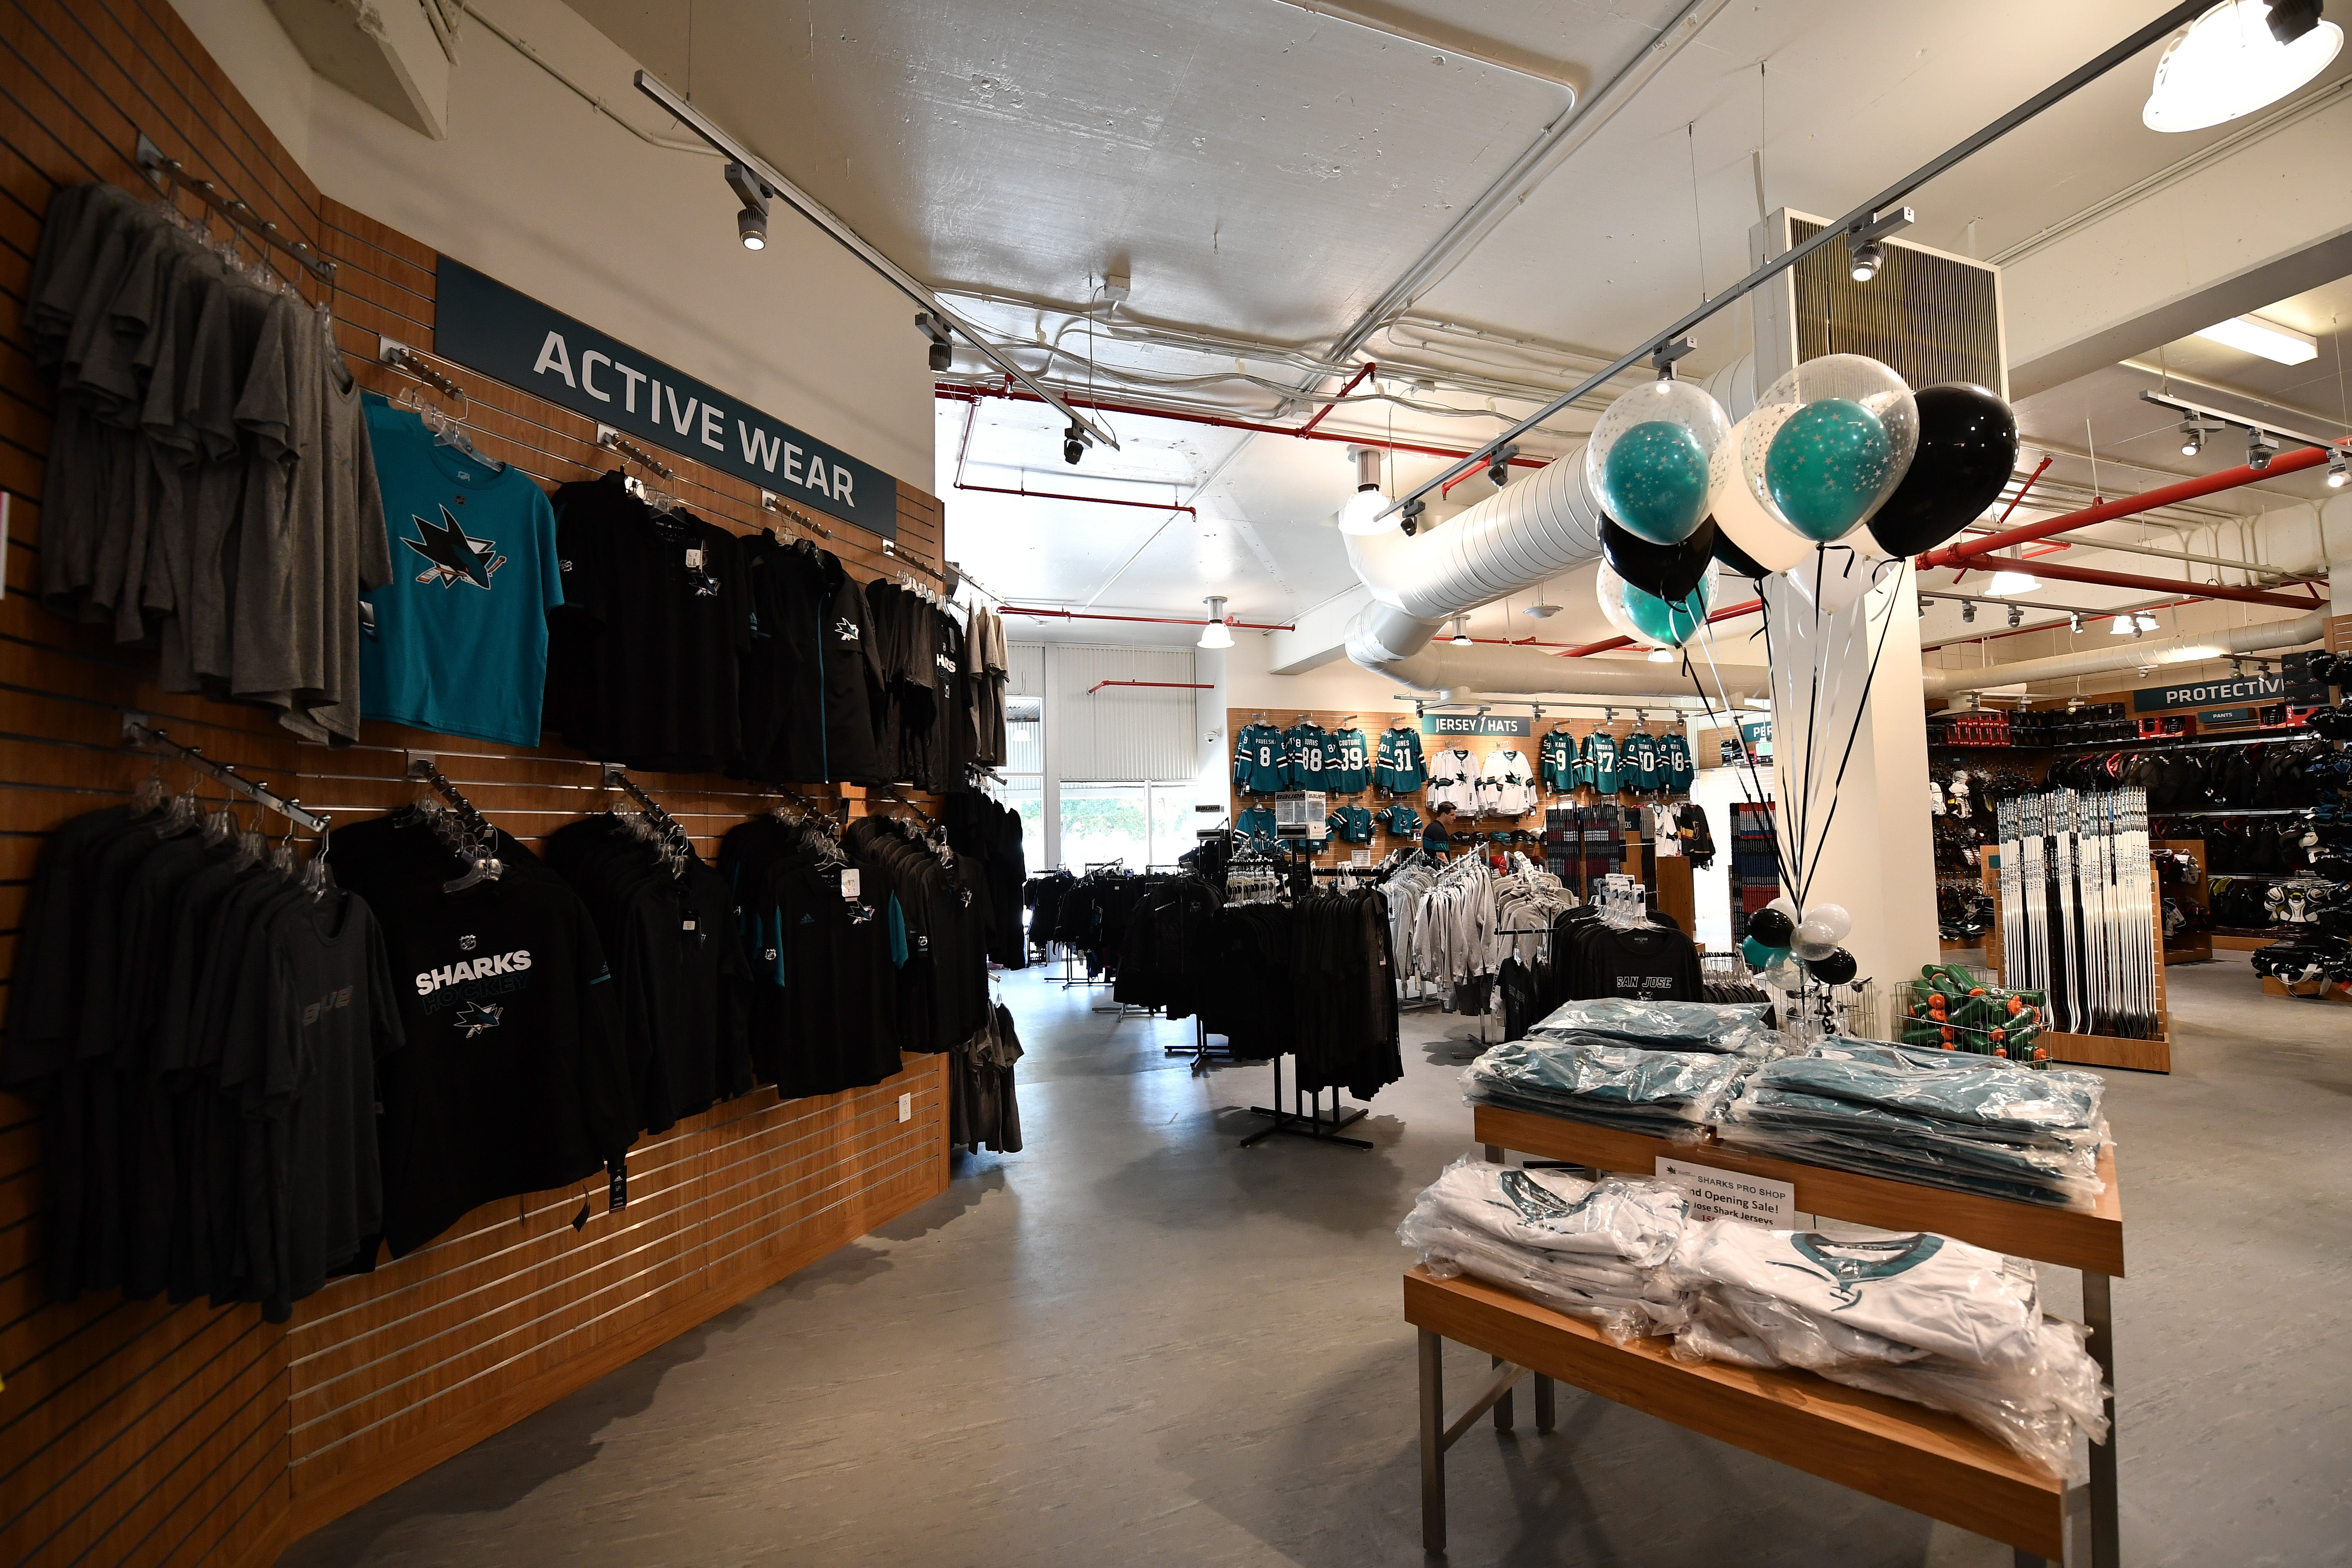 Photos at San Jose Sharks Store - Gift Store in Central San Jose